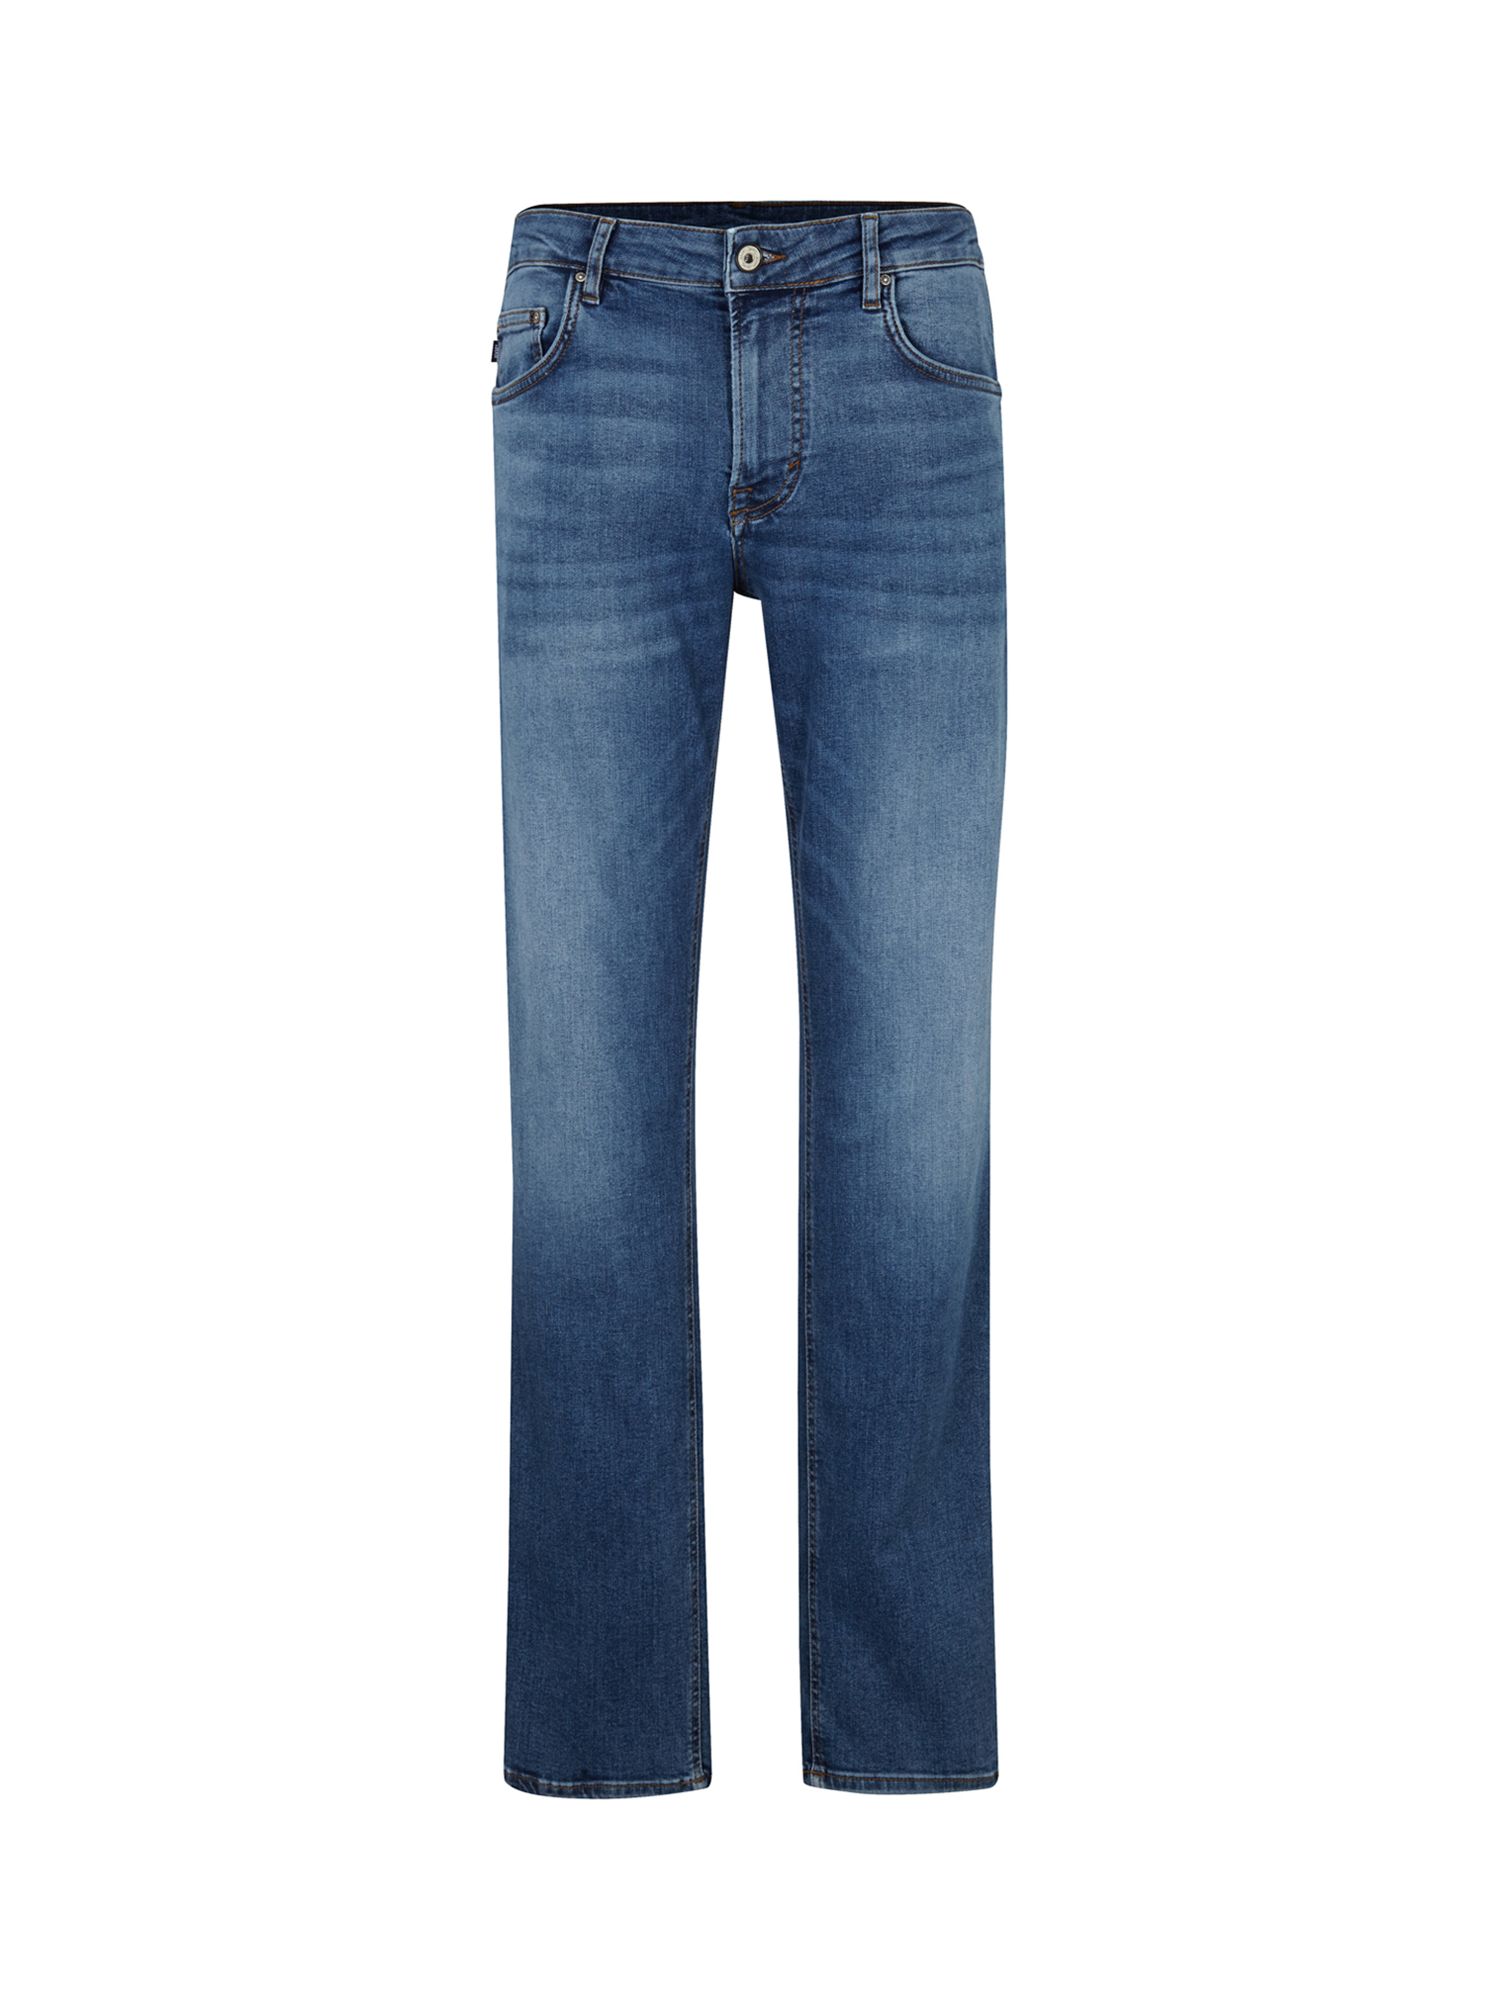 John Lewis ANYDAY Straight Fit Denim Jeans, Stone Wash